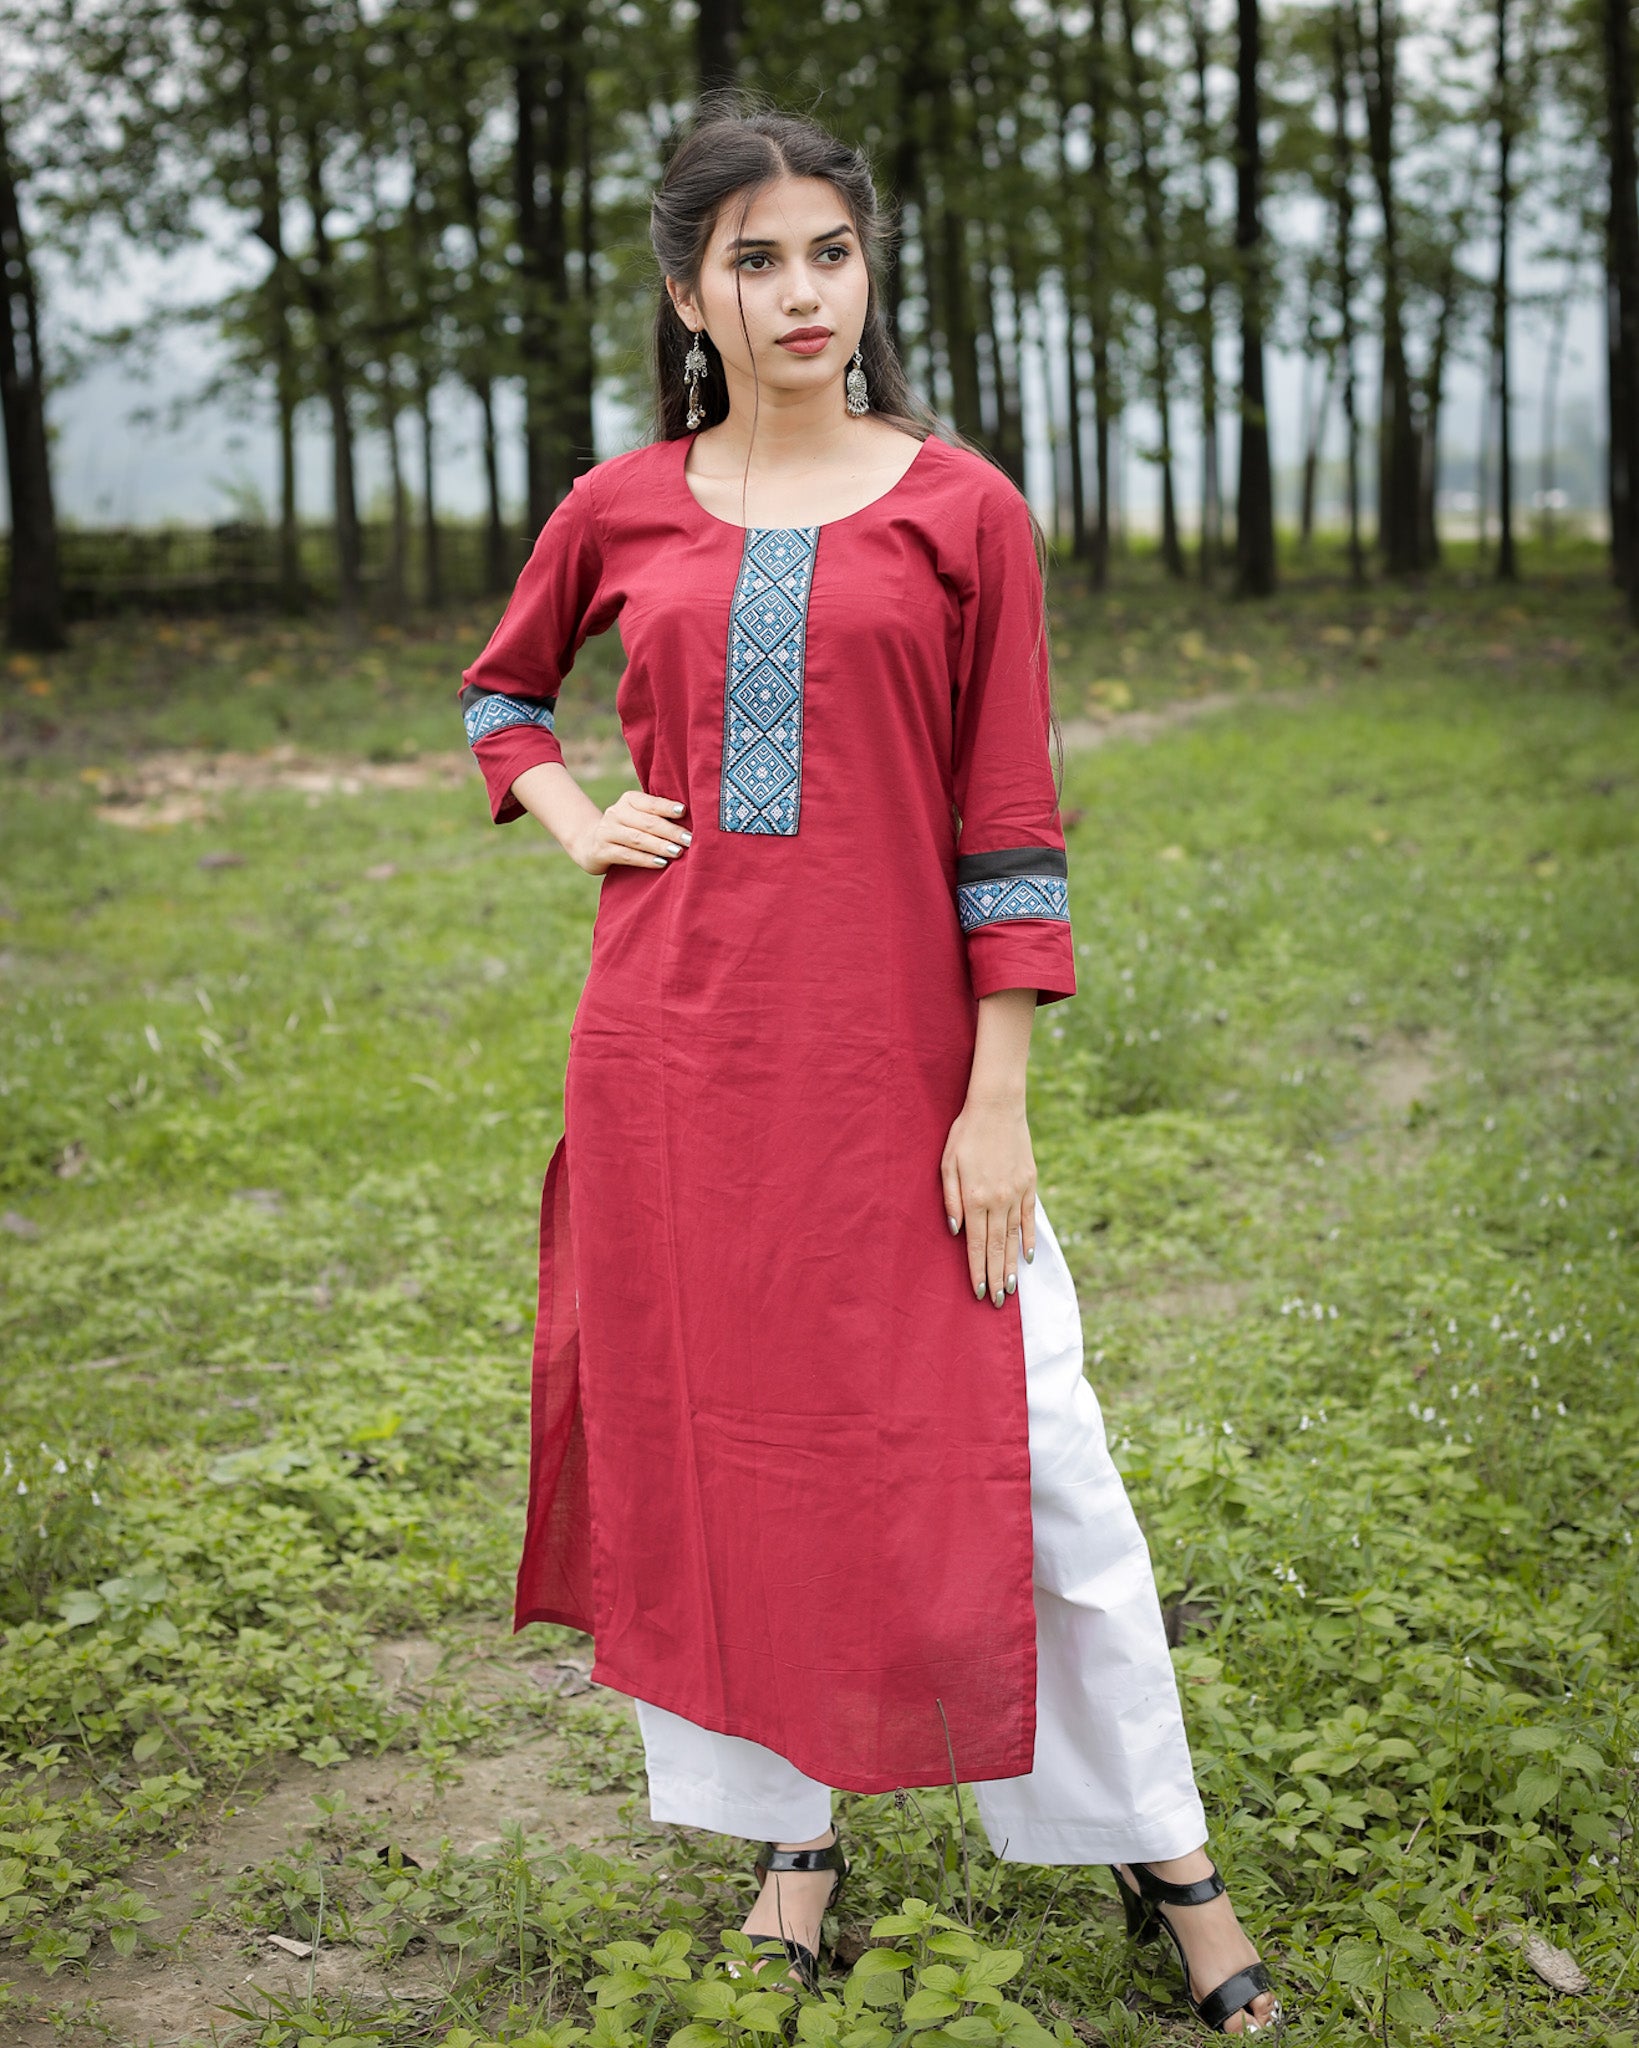 Wine red cotton kurta with blue weave design details – Periwinkle Fashion